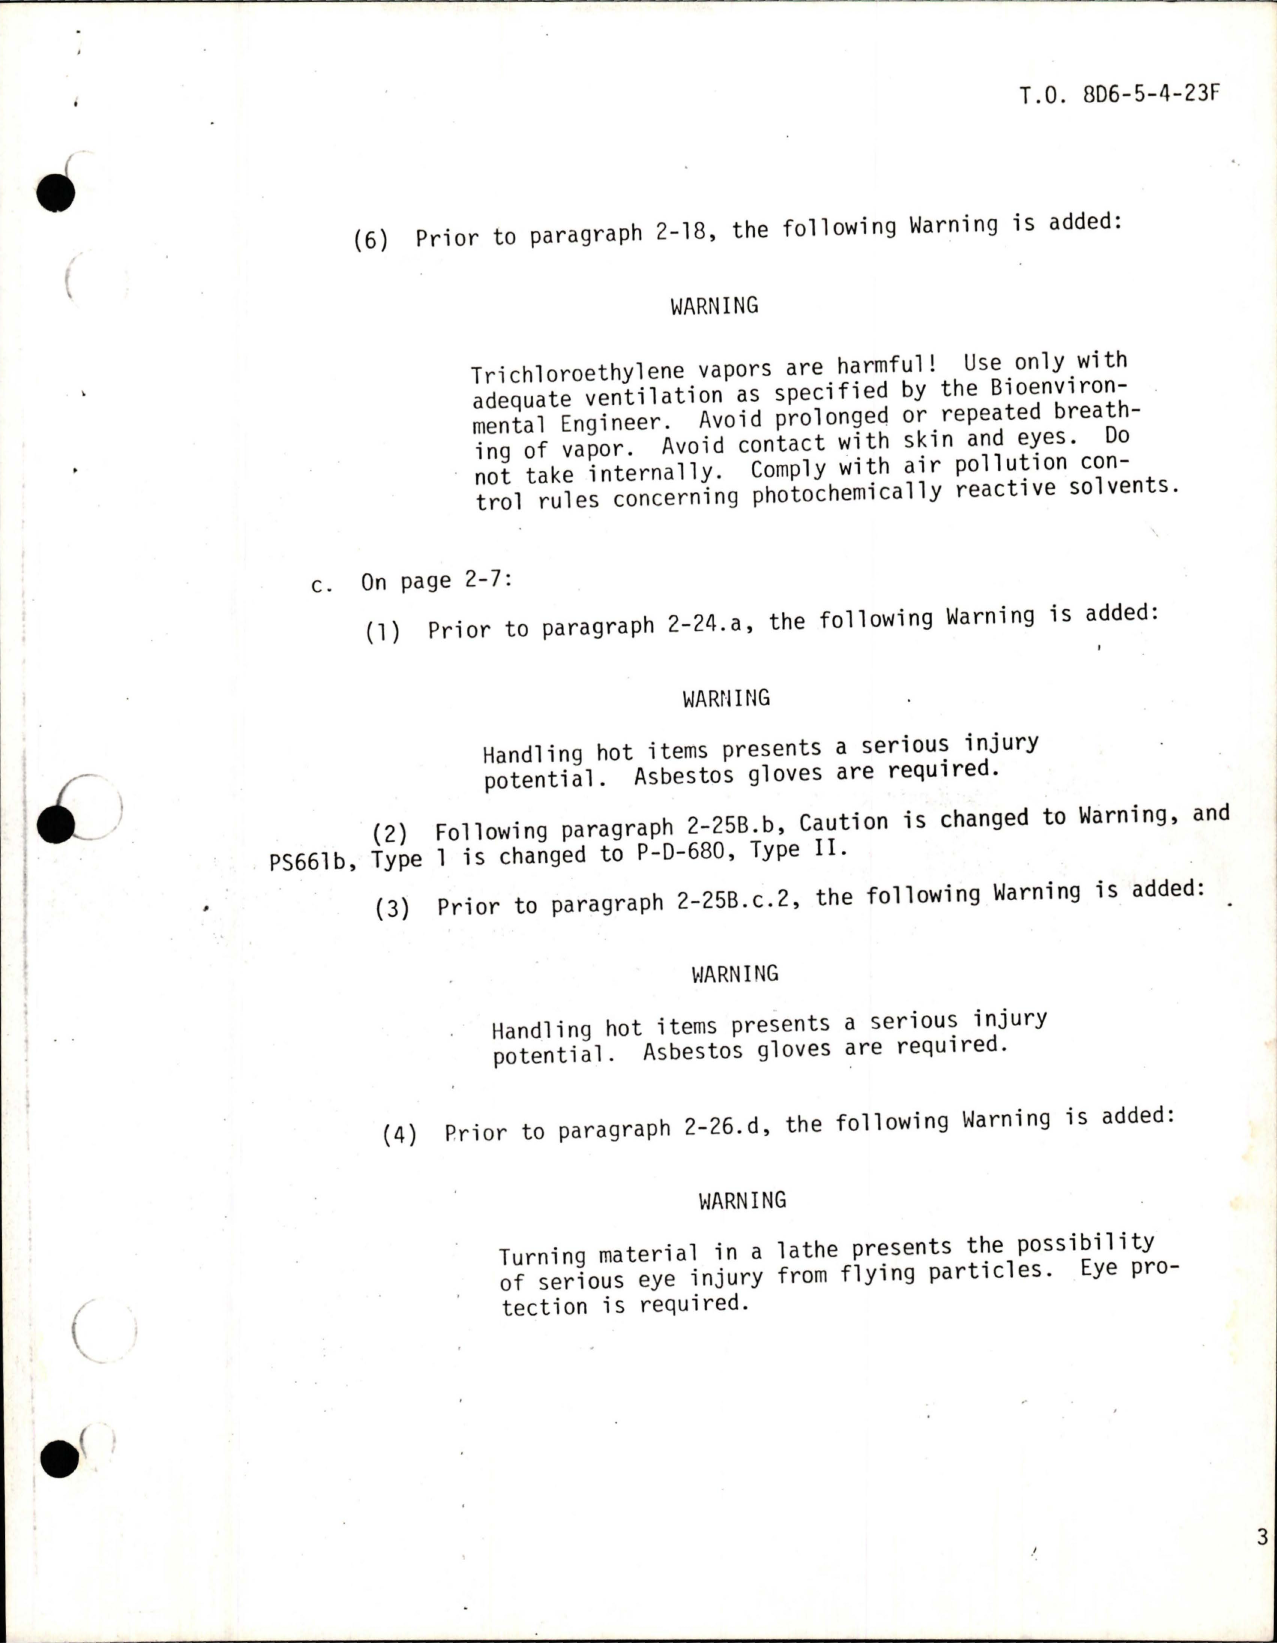 Sample page 5 from AirCorps Library document: Supplement to Overhaul for DC Generator - Parts A50J251-4, A50J251-1, and 903J789-1